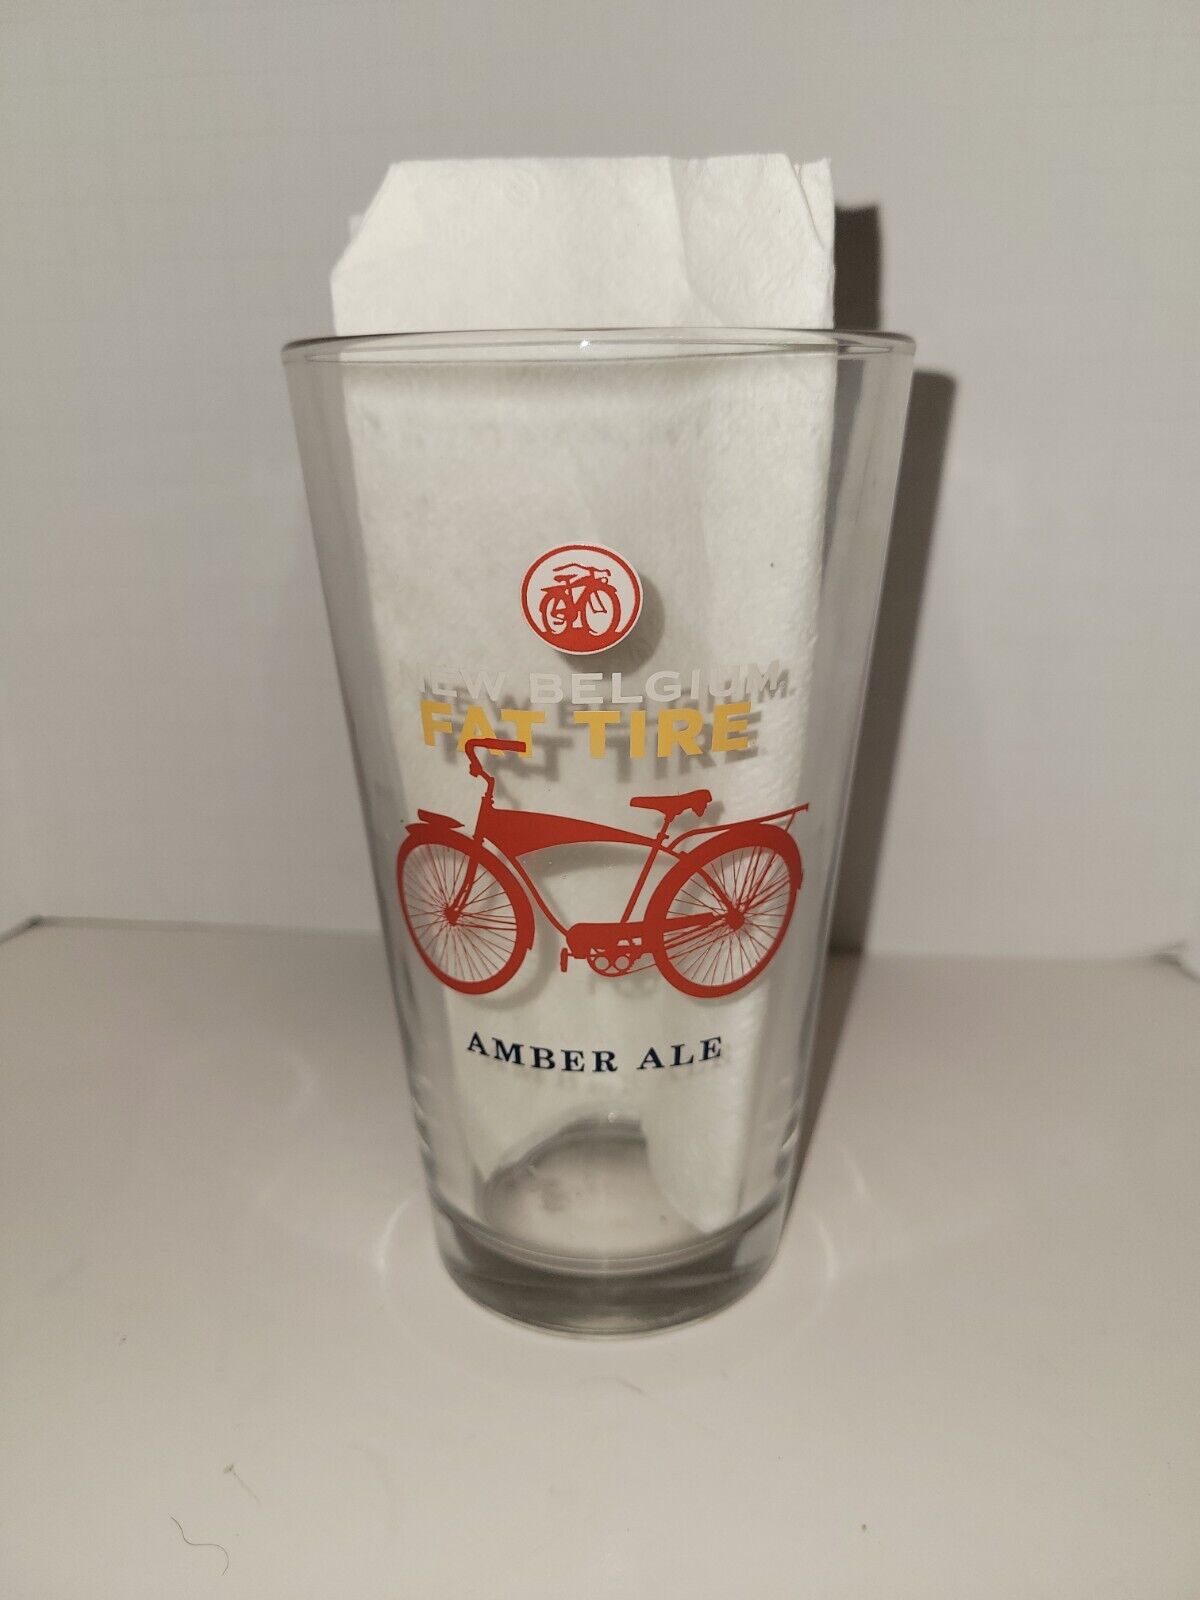 New Belgium Fat Tire Amber Ale Clear Pint Glass Promotional Advertising 